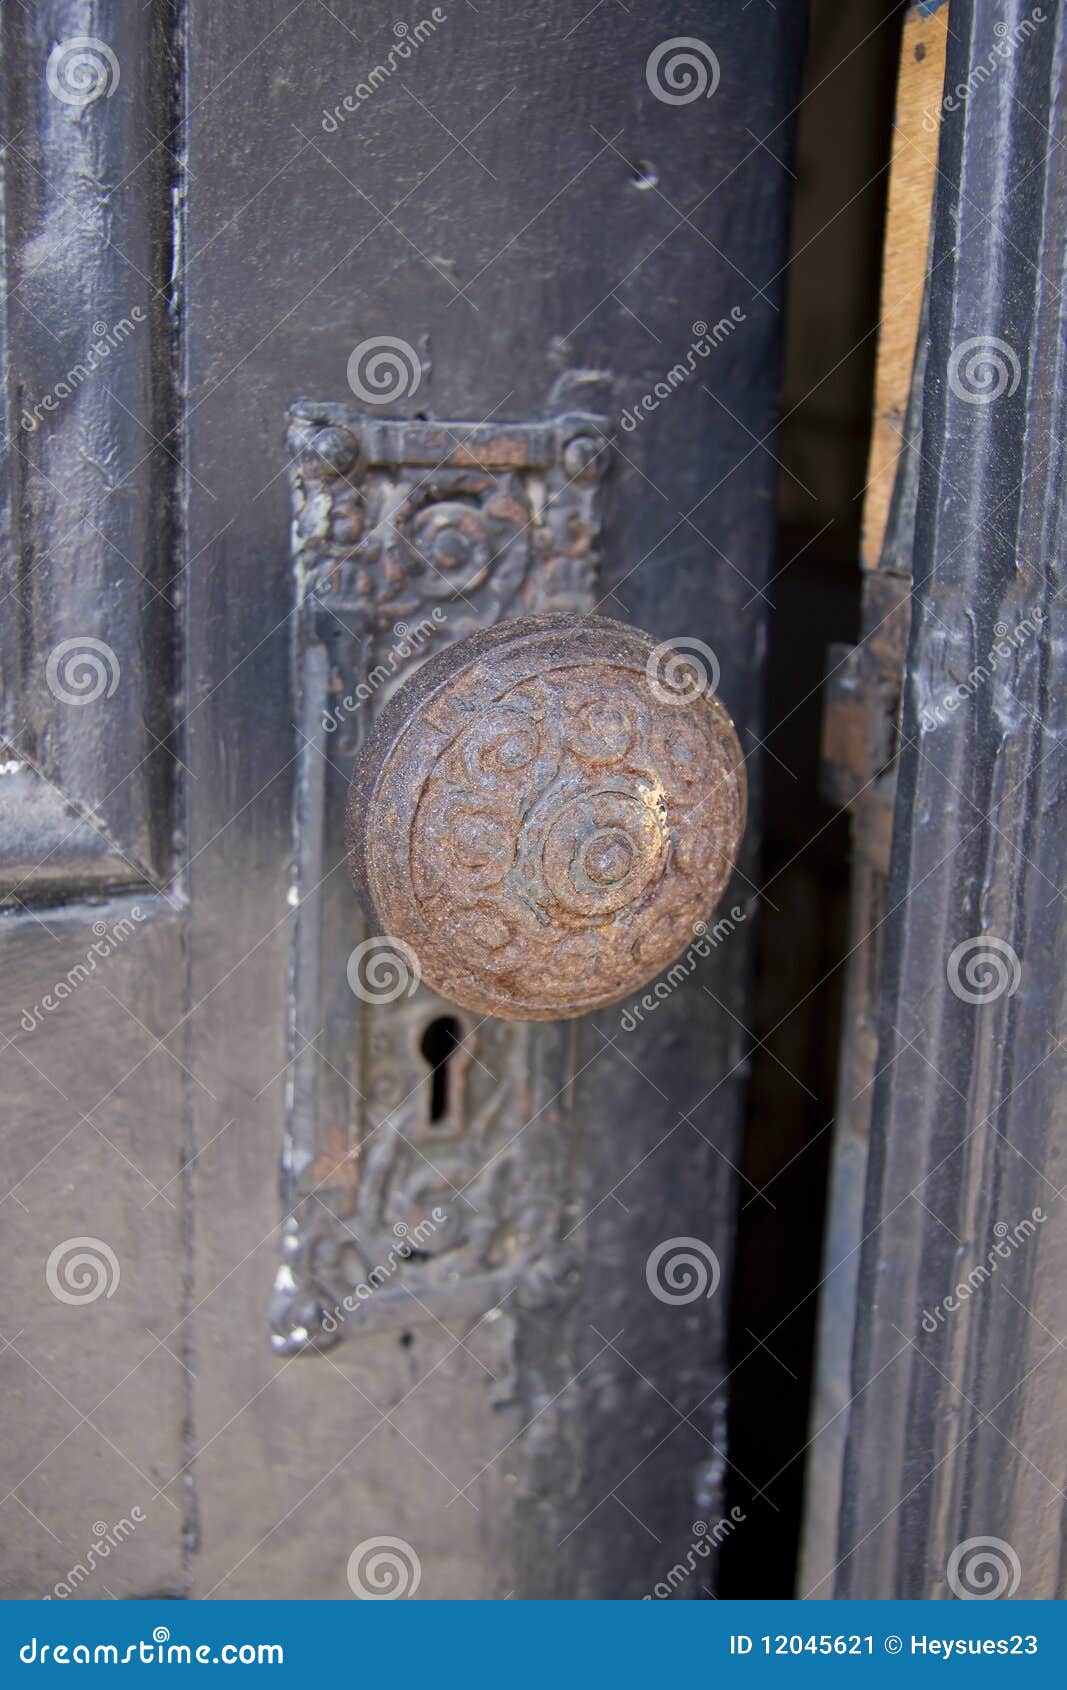 Old door knob stock image. Image of house, aged, front - 12045621